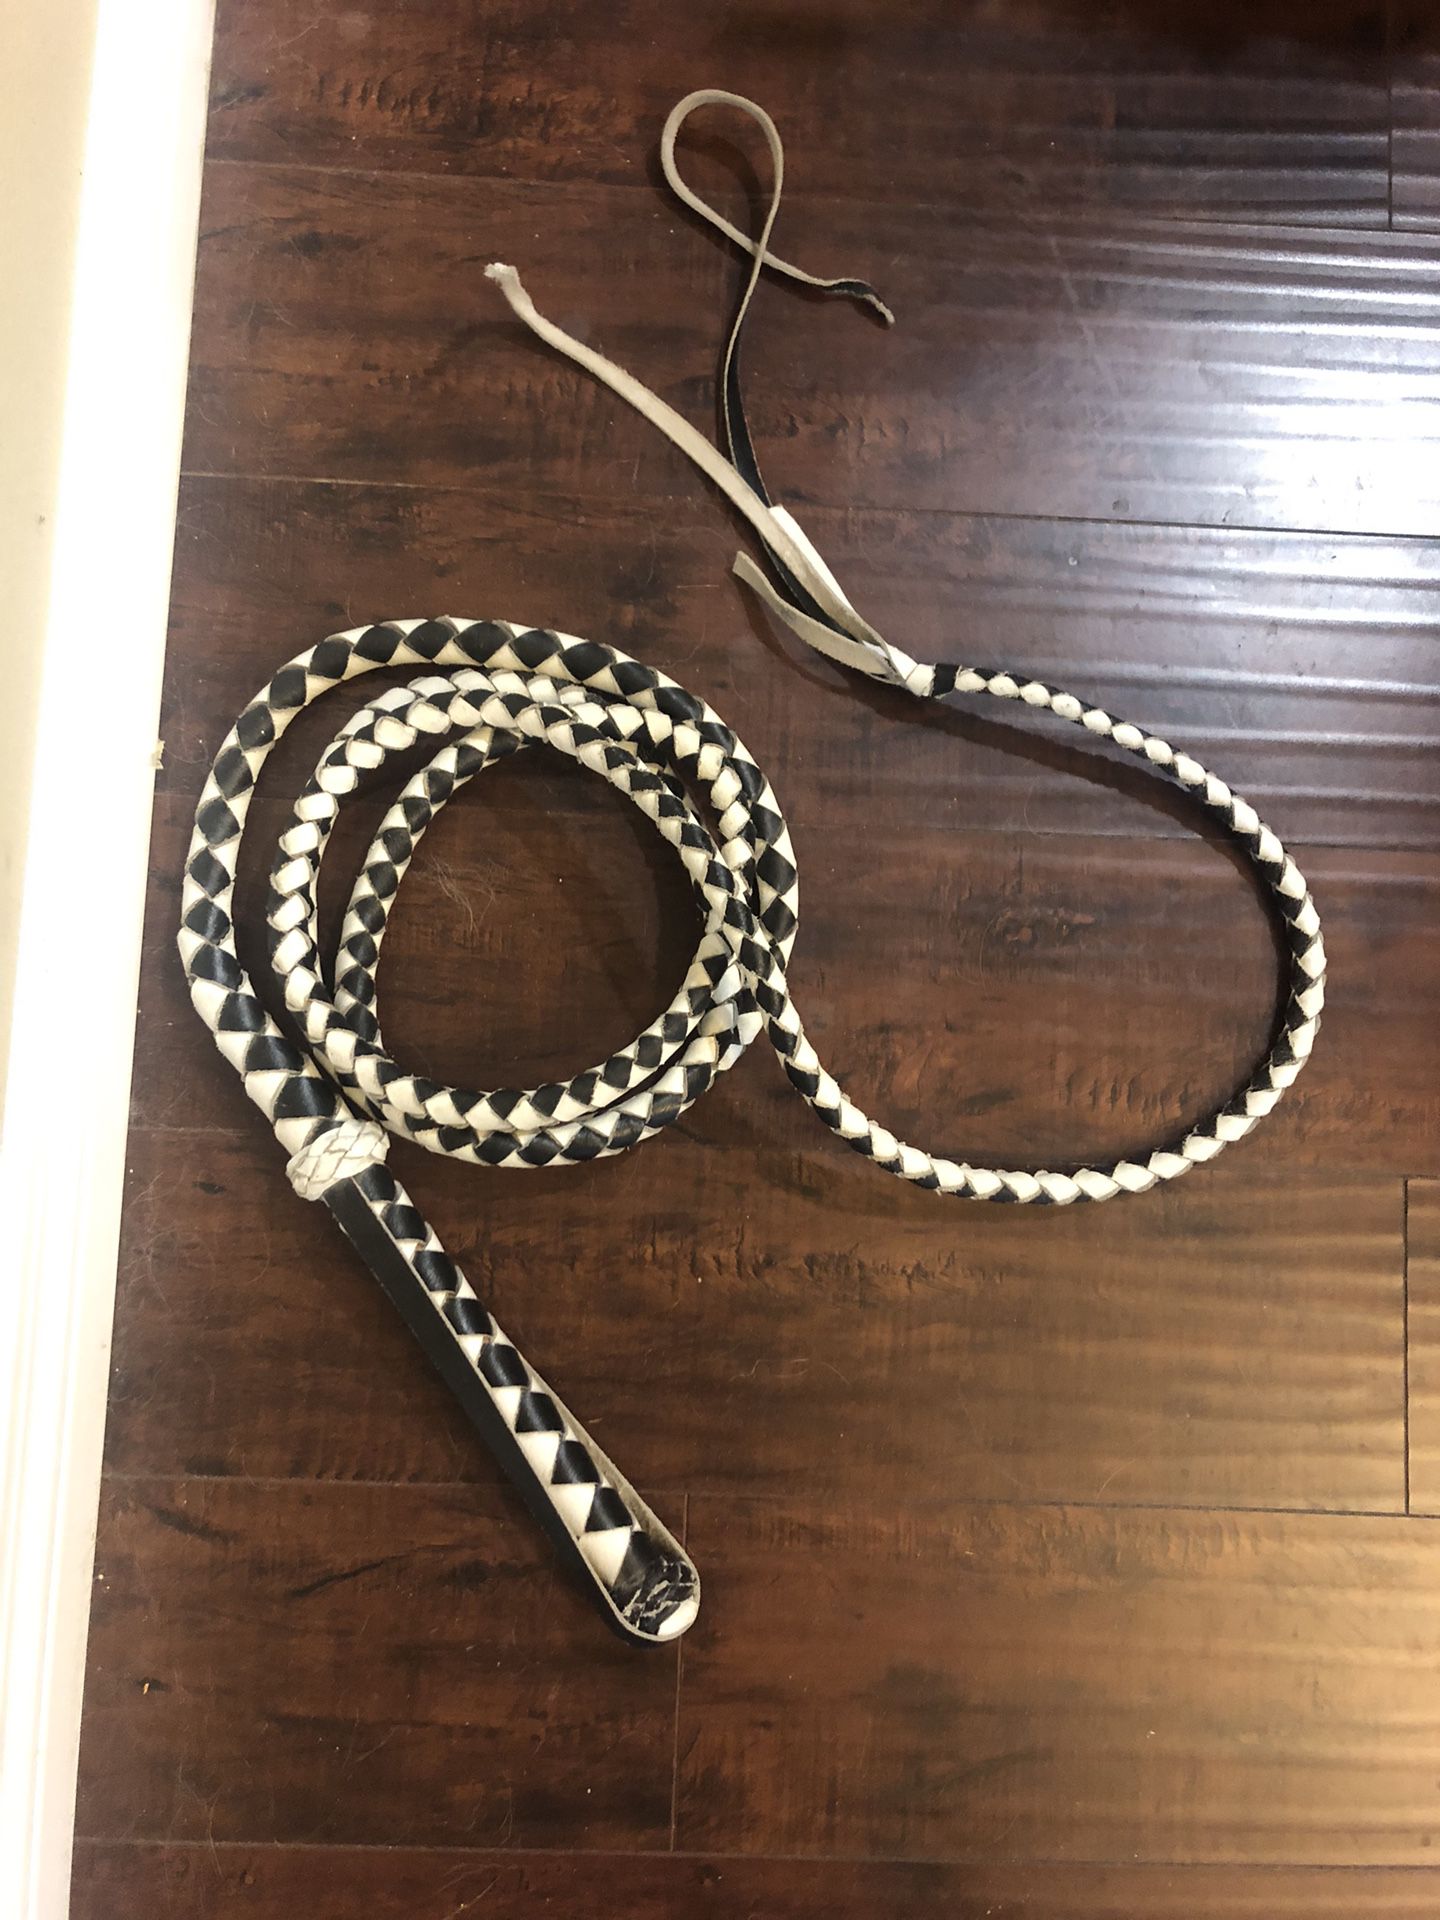 Blk and white Bull whip approx 9’